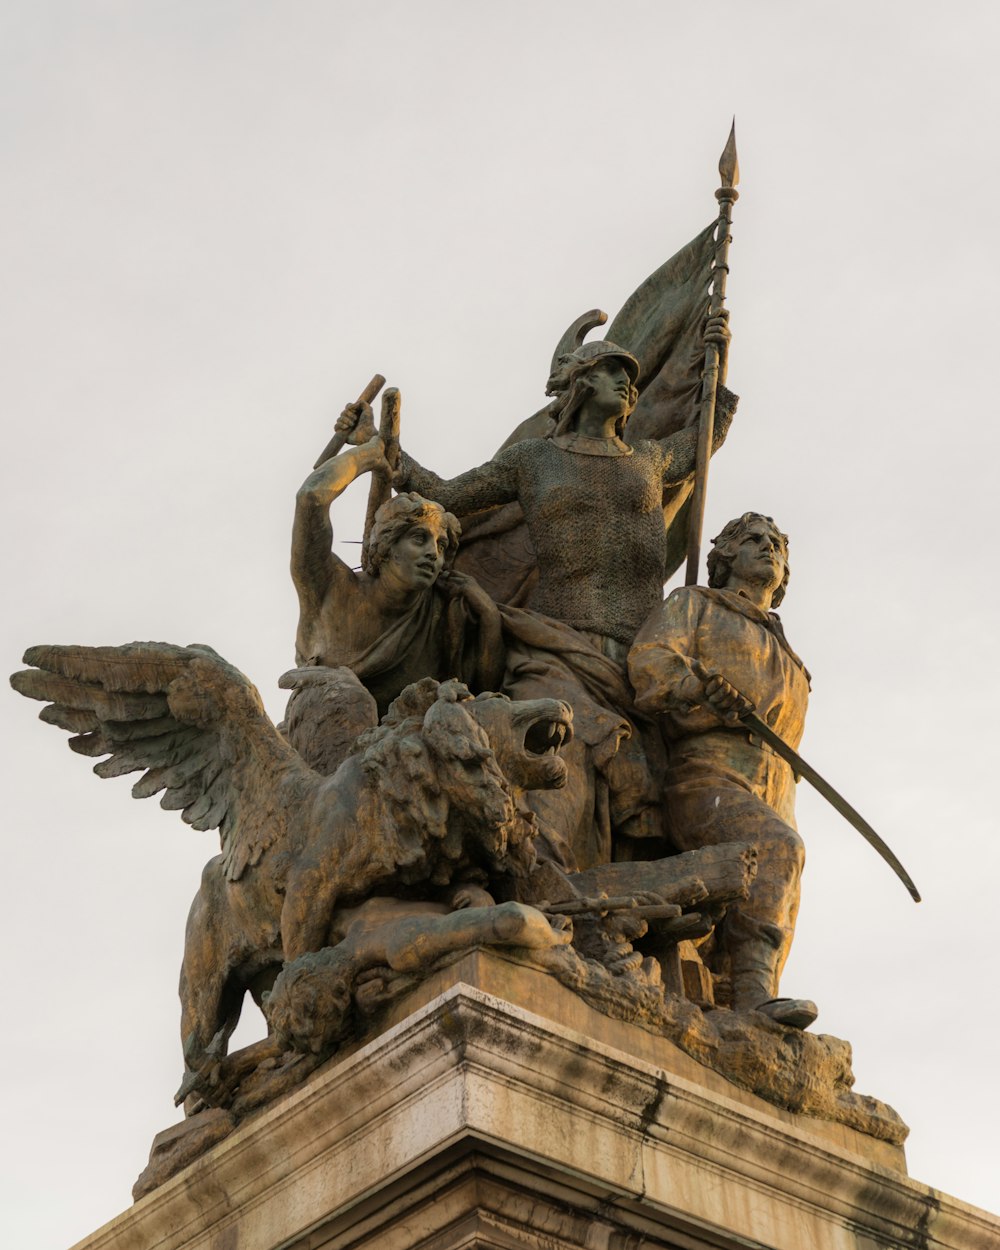 a statue of a man on a horse holding a flag